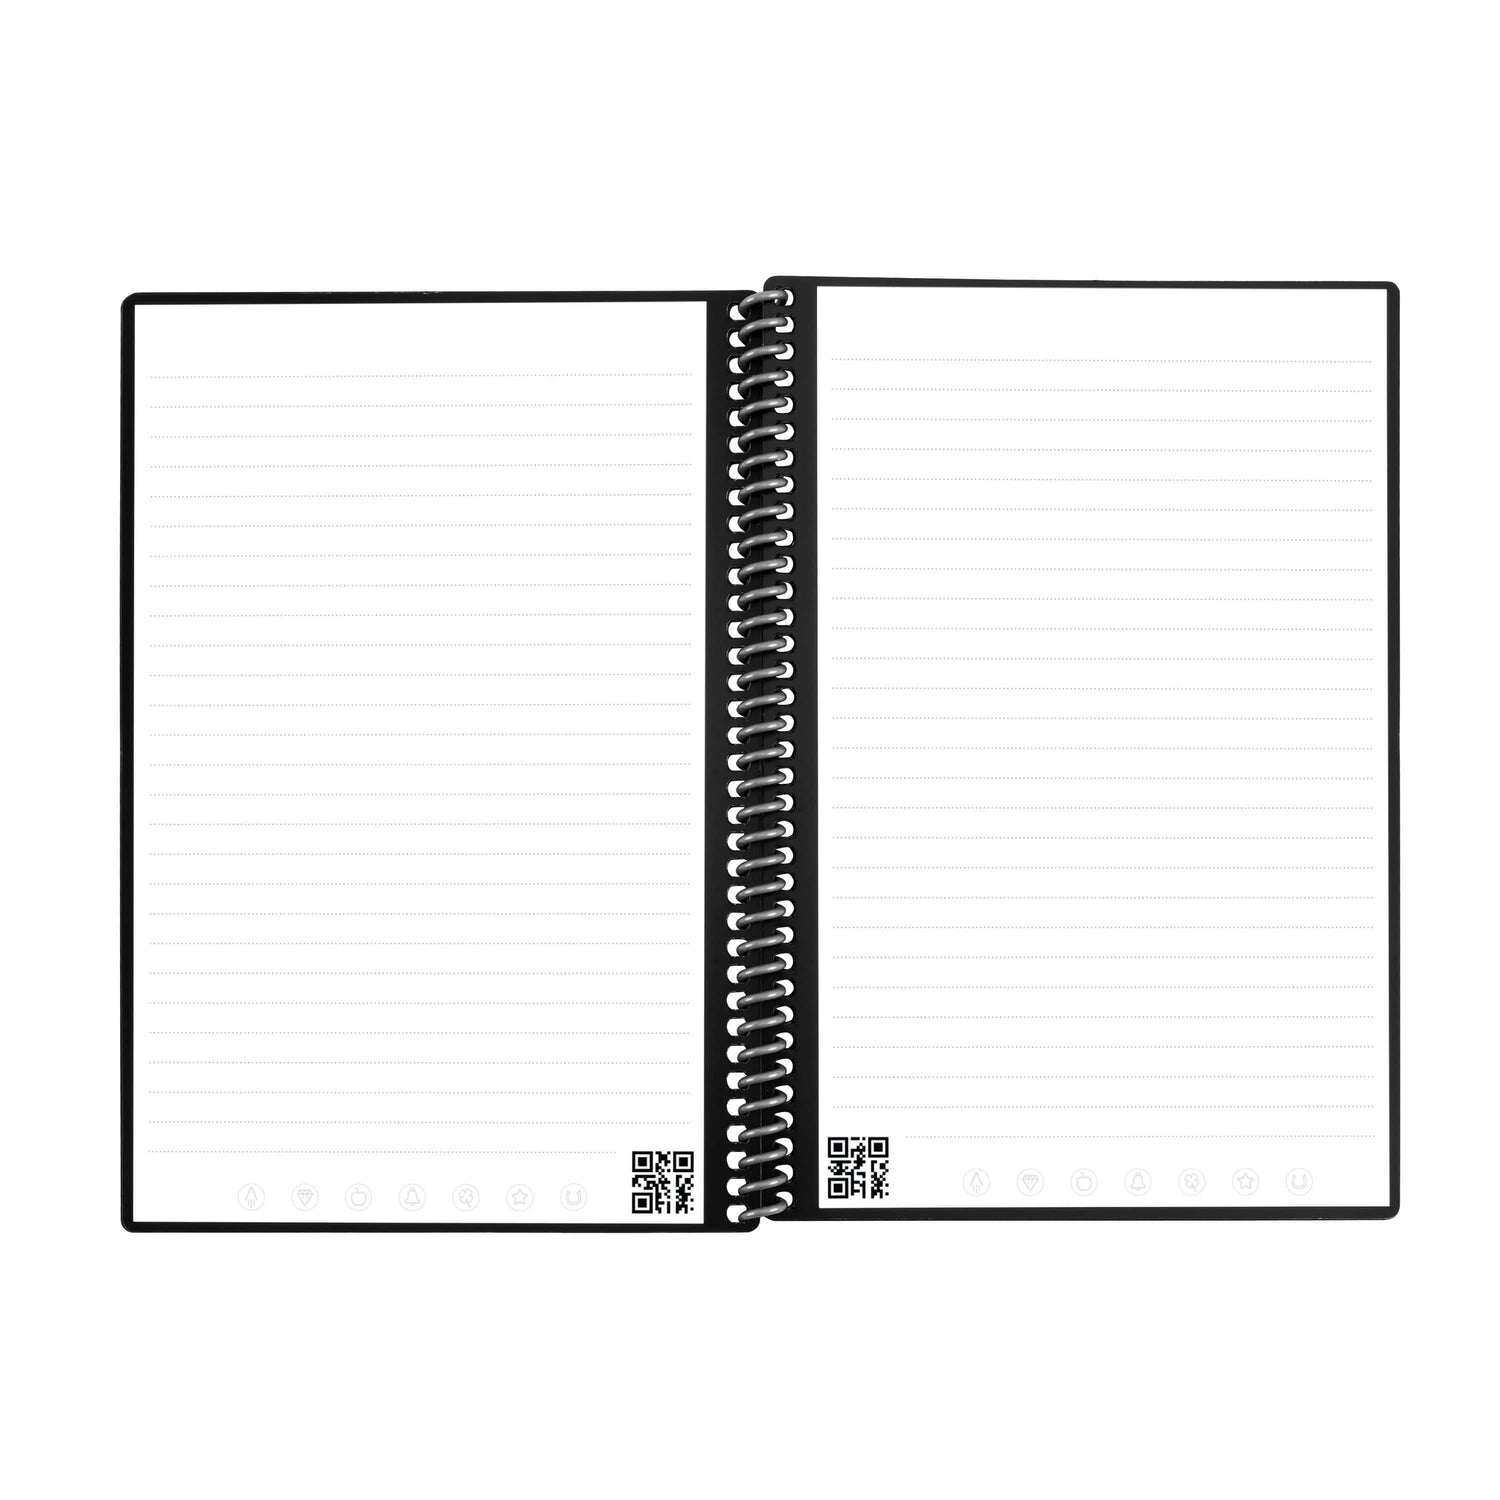 17″ x 11″ Inches Top Desk Double Sided Graph Paper Pad Pack of 4